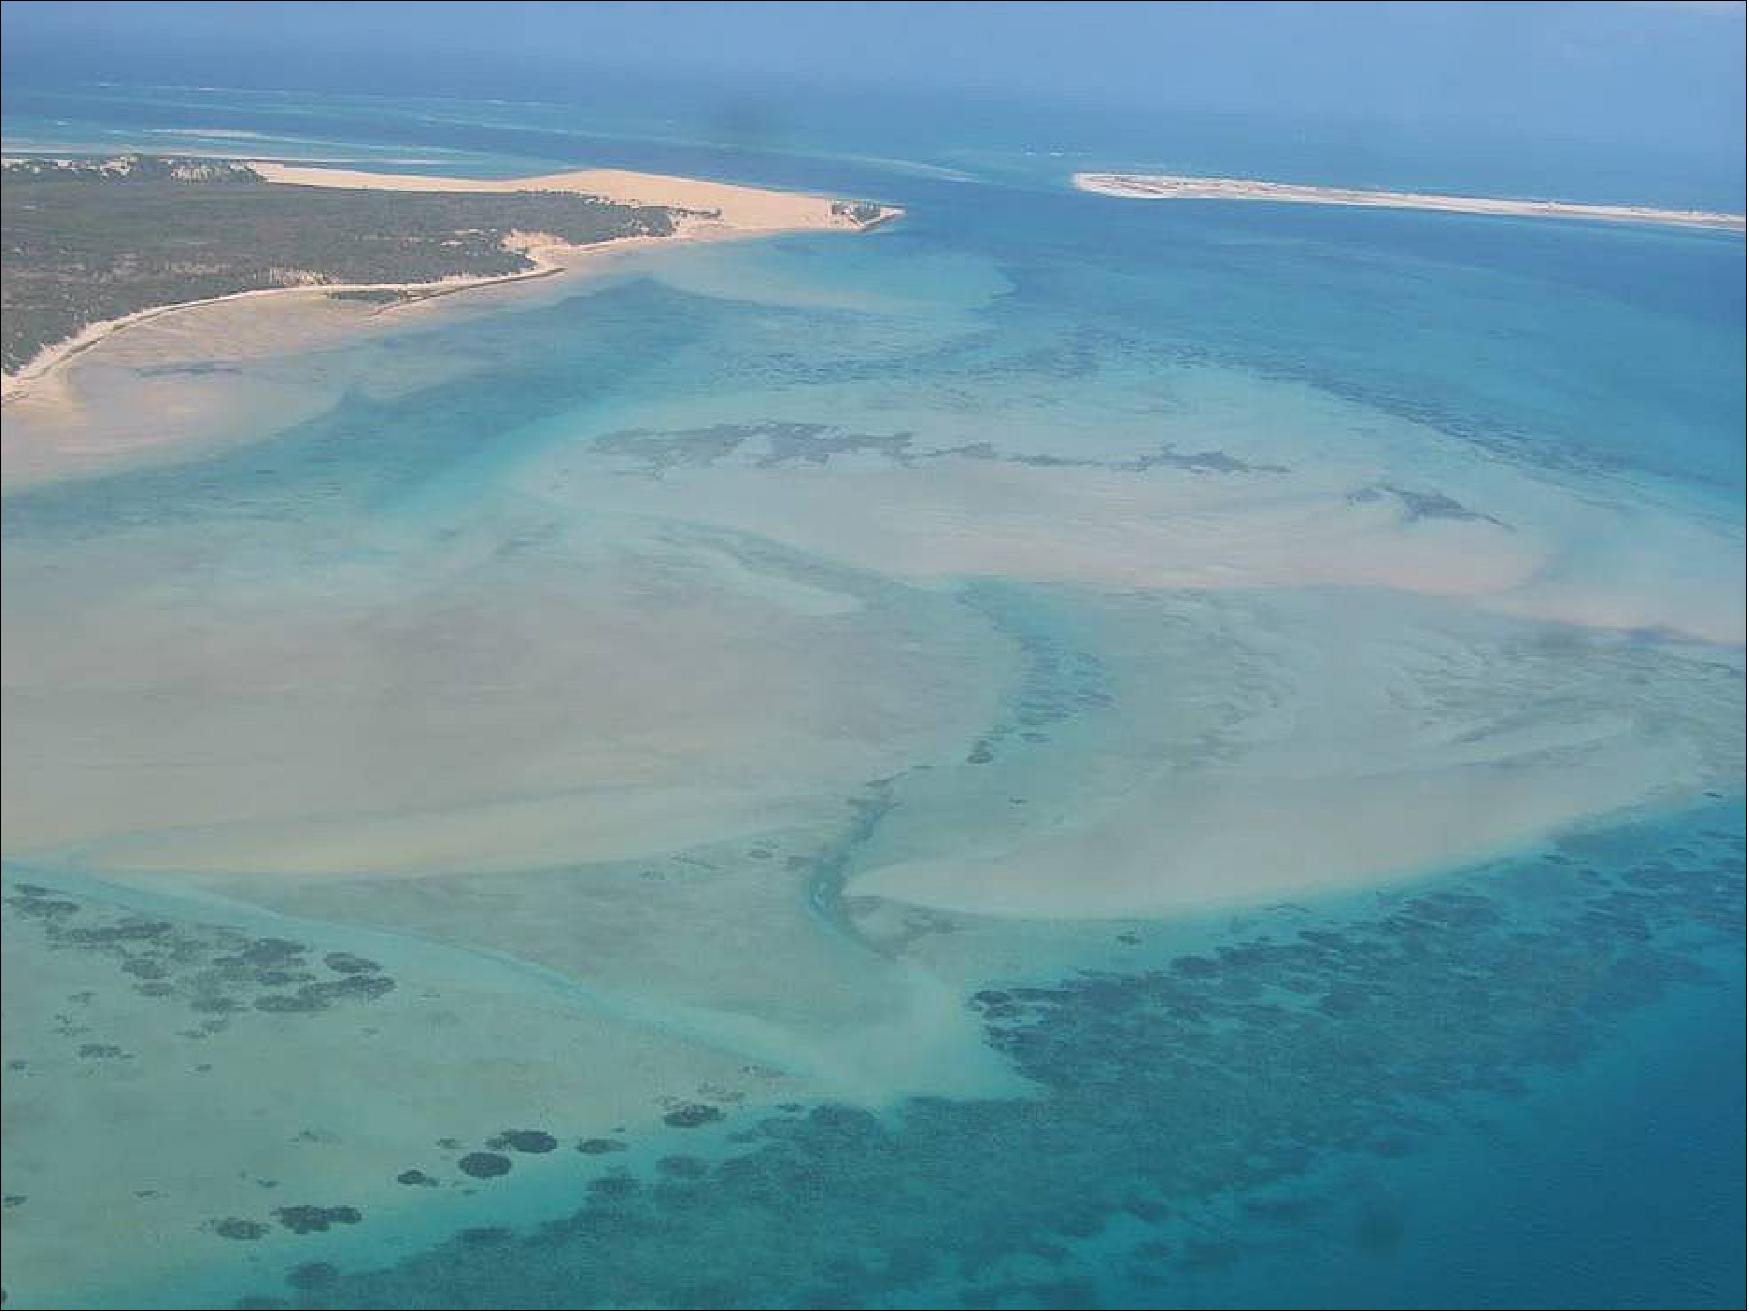 Figure 21: Scientists are using ICESat-2 to measure ecosystems far beyond the polar regions, including sea grass in shallow coastal waters such as this one in Mozambique (image credit: (Lola Fatoyinbo/NASA)